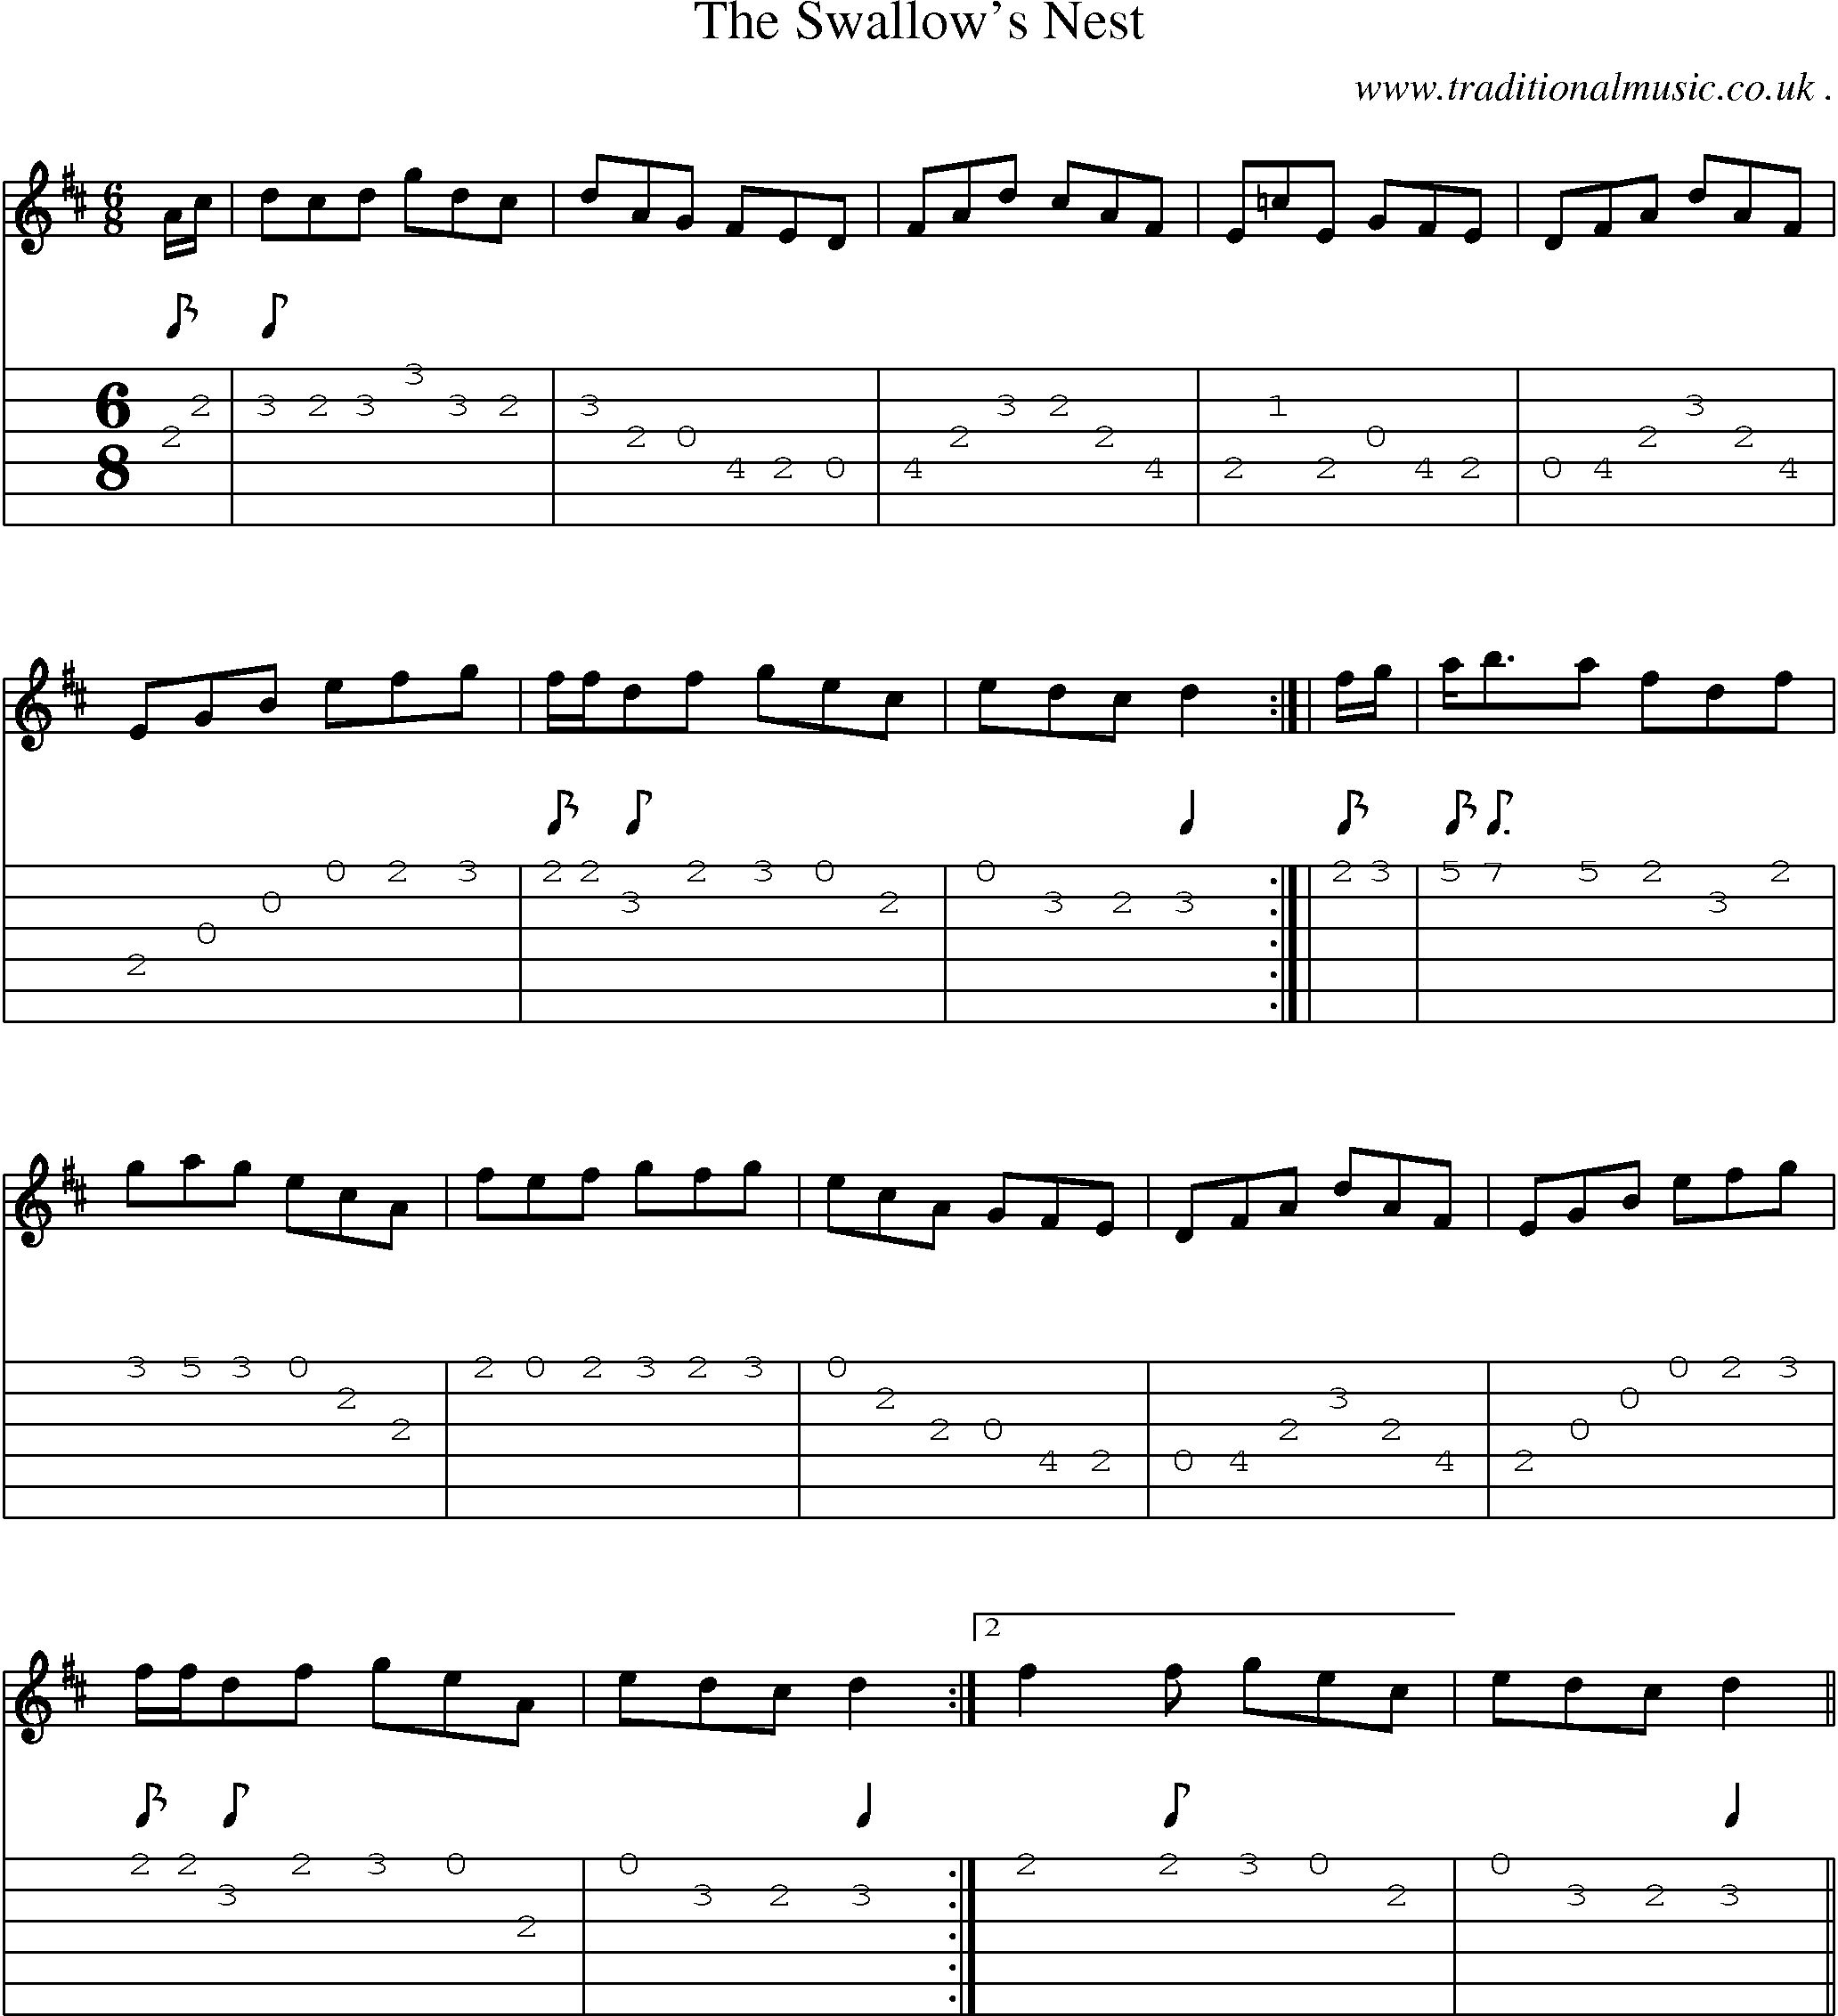 Sheet-Music and Guitar Tabs for The Swallows Nest